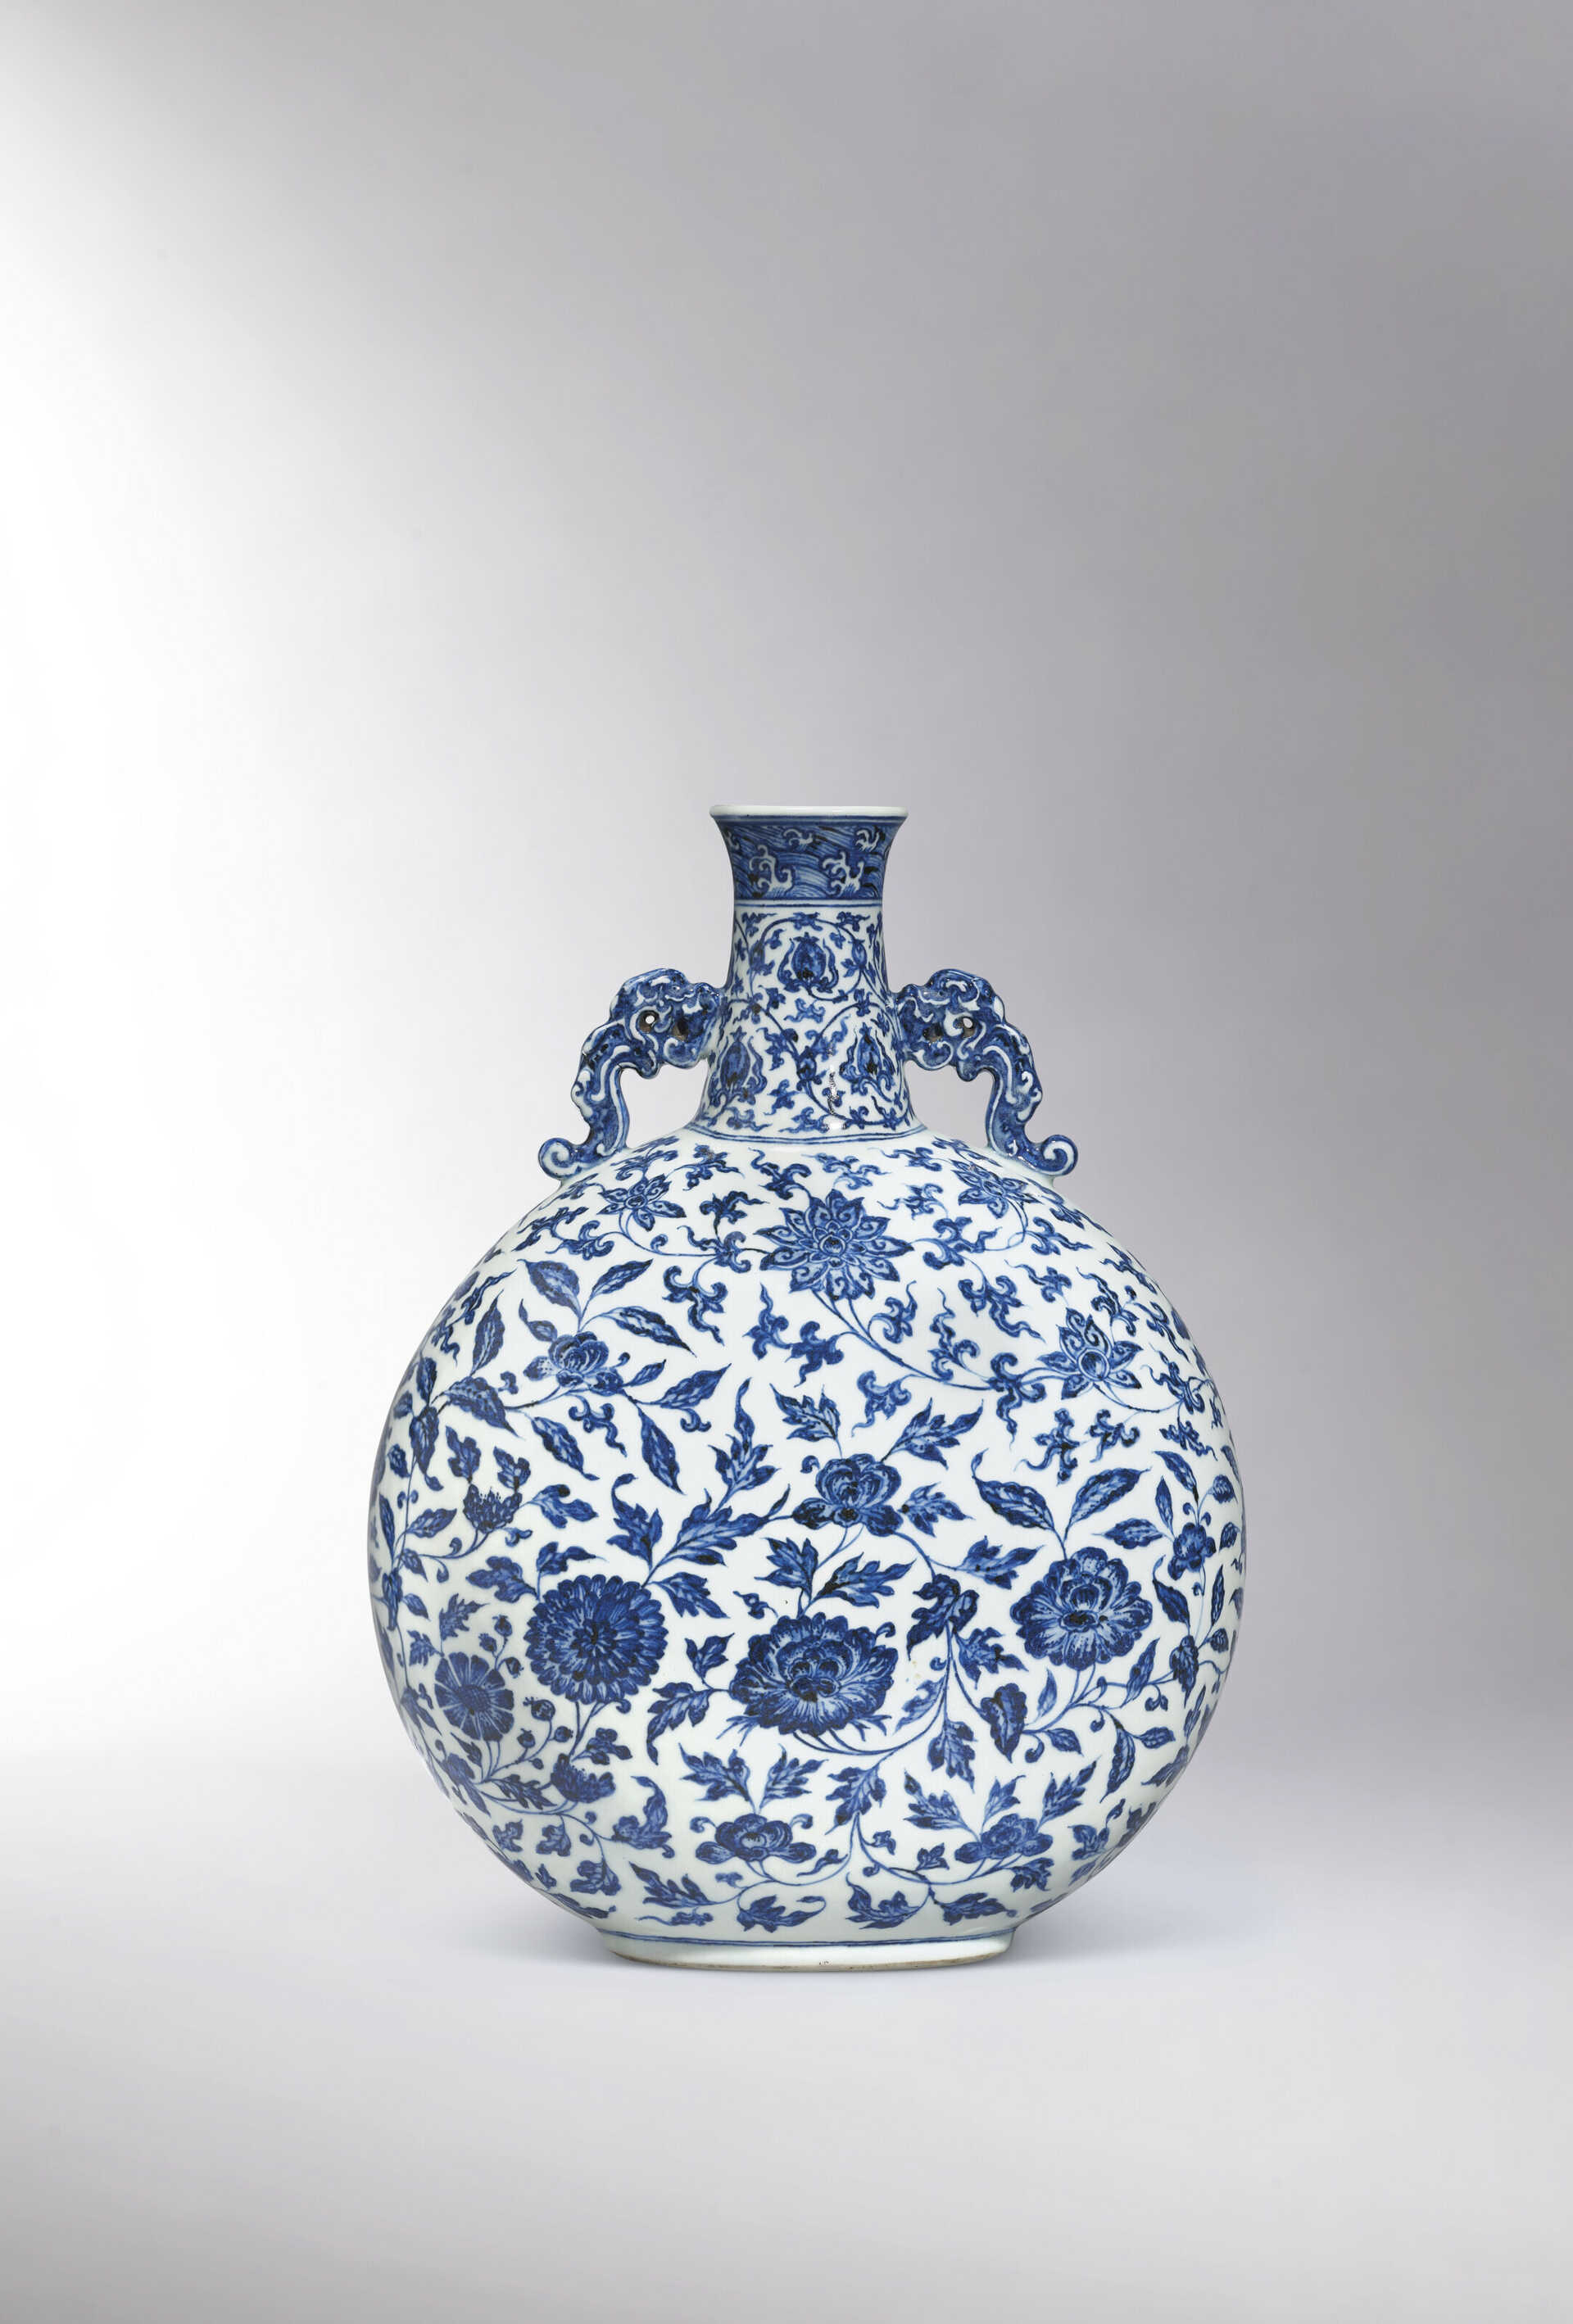 A FINE MAGNIFICENT AND EXCEEDINGLY RARE BLUE AND WHITE ‘FLOWERS OF THE FOUR SEASONS’ MOONFLASK